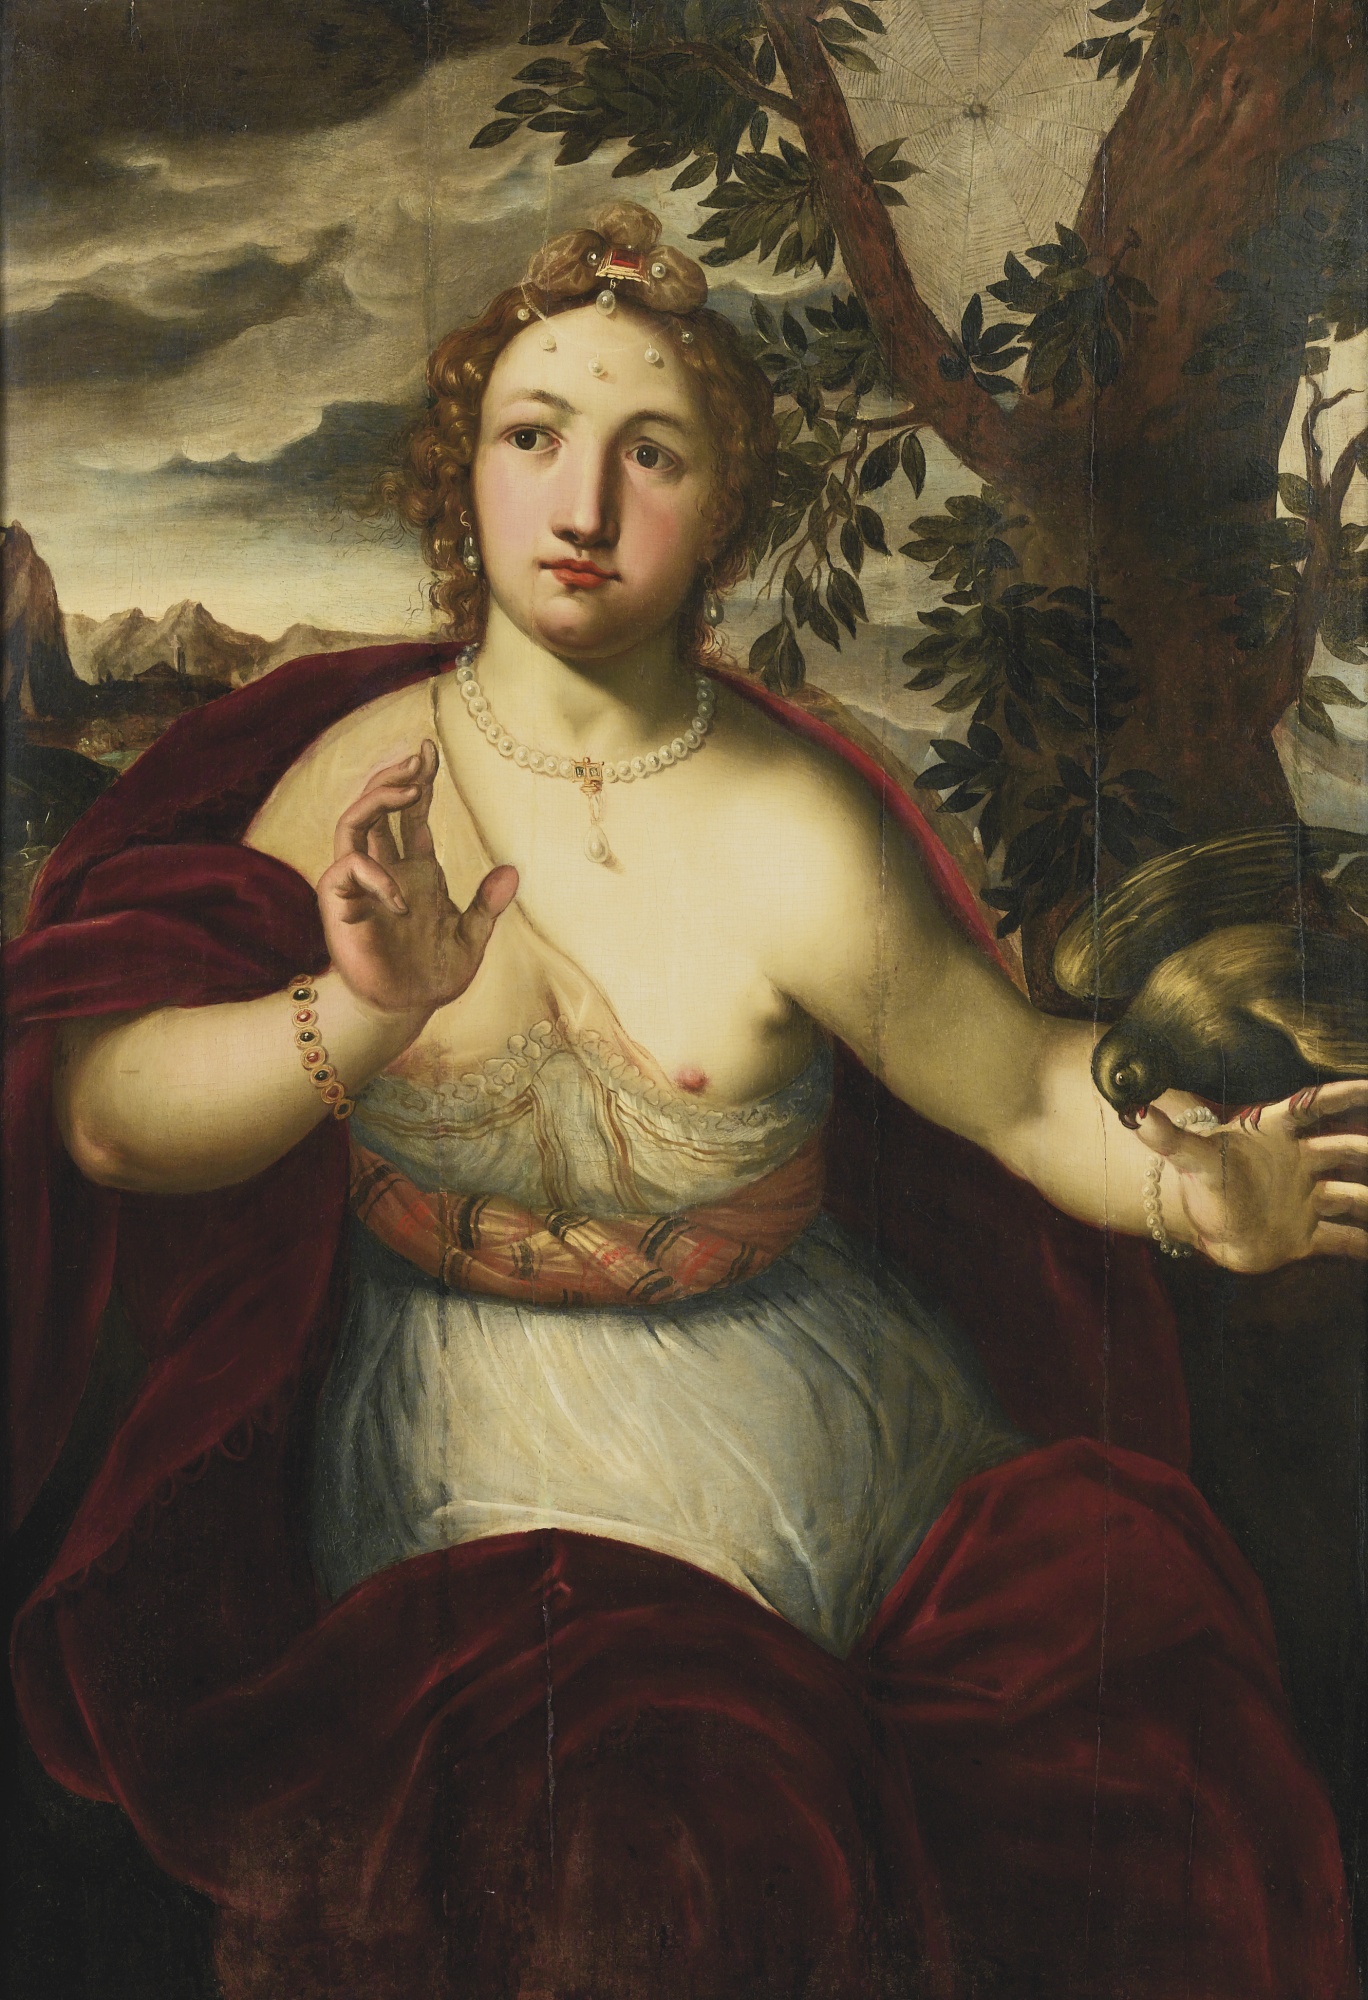 Attributed_to_Otto_van_Veen_A_Lady_Bitten_by_a_Parrot coll part